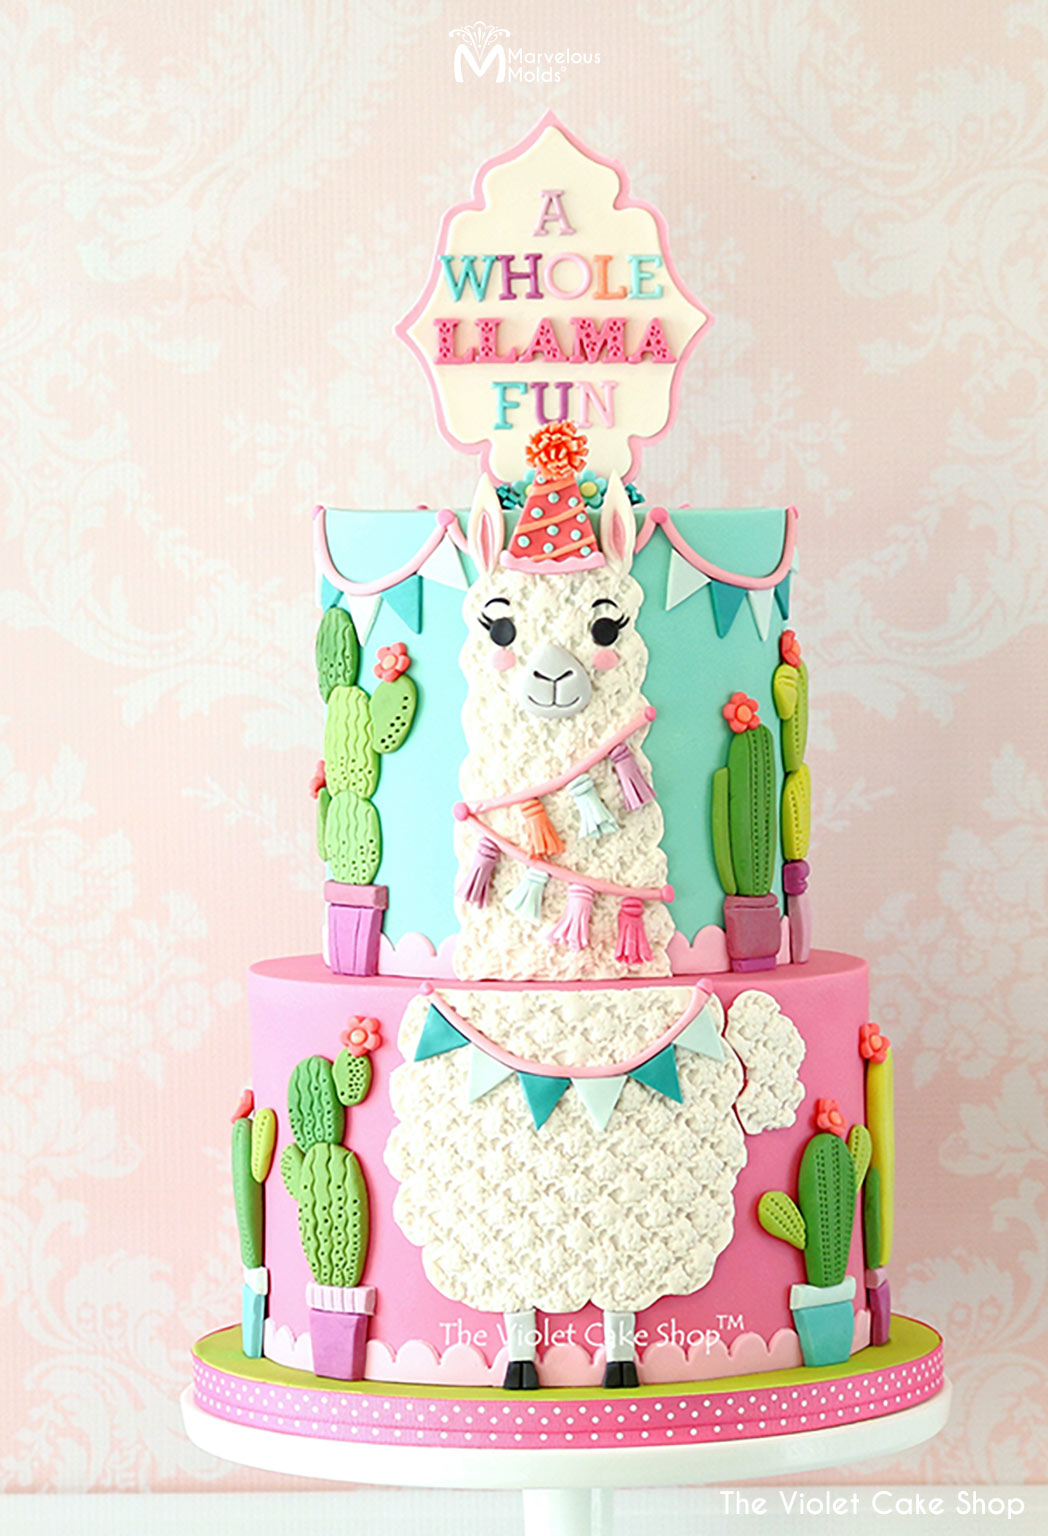 Llama Birthday Cake Decorated Using the Trinity Knit Simpress Silicone Mold by Marvelous Molds